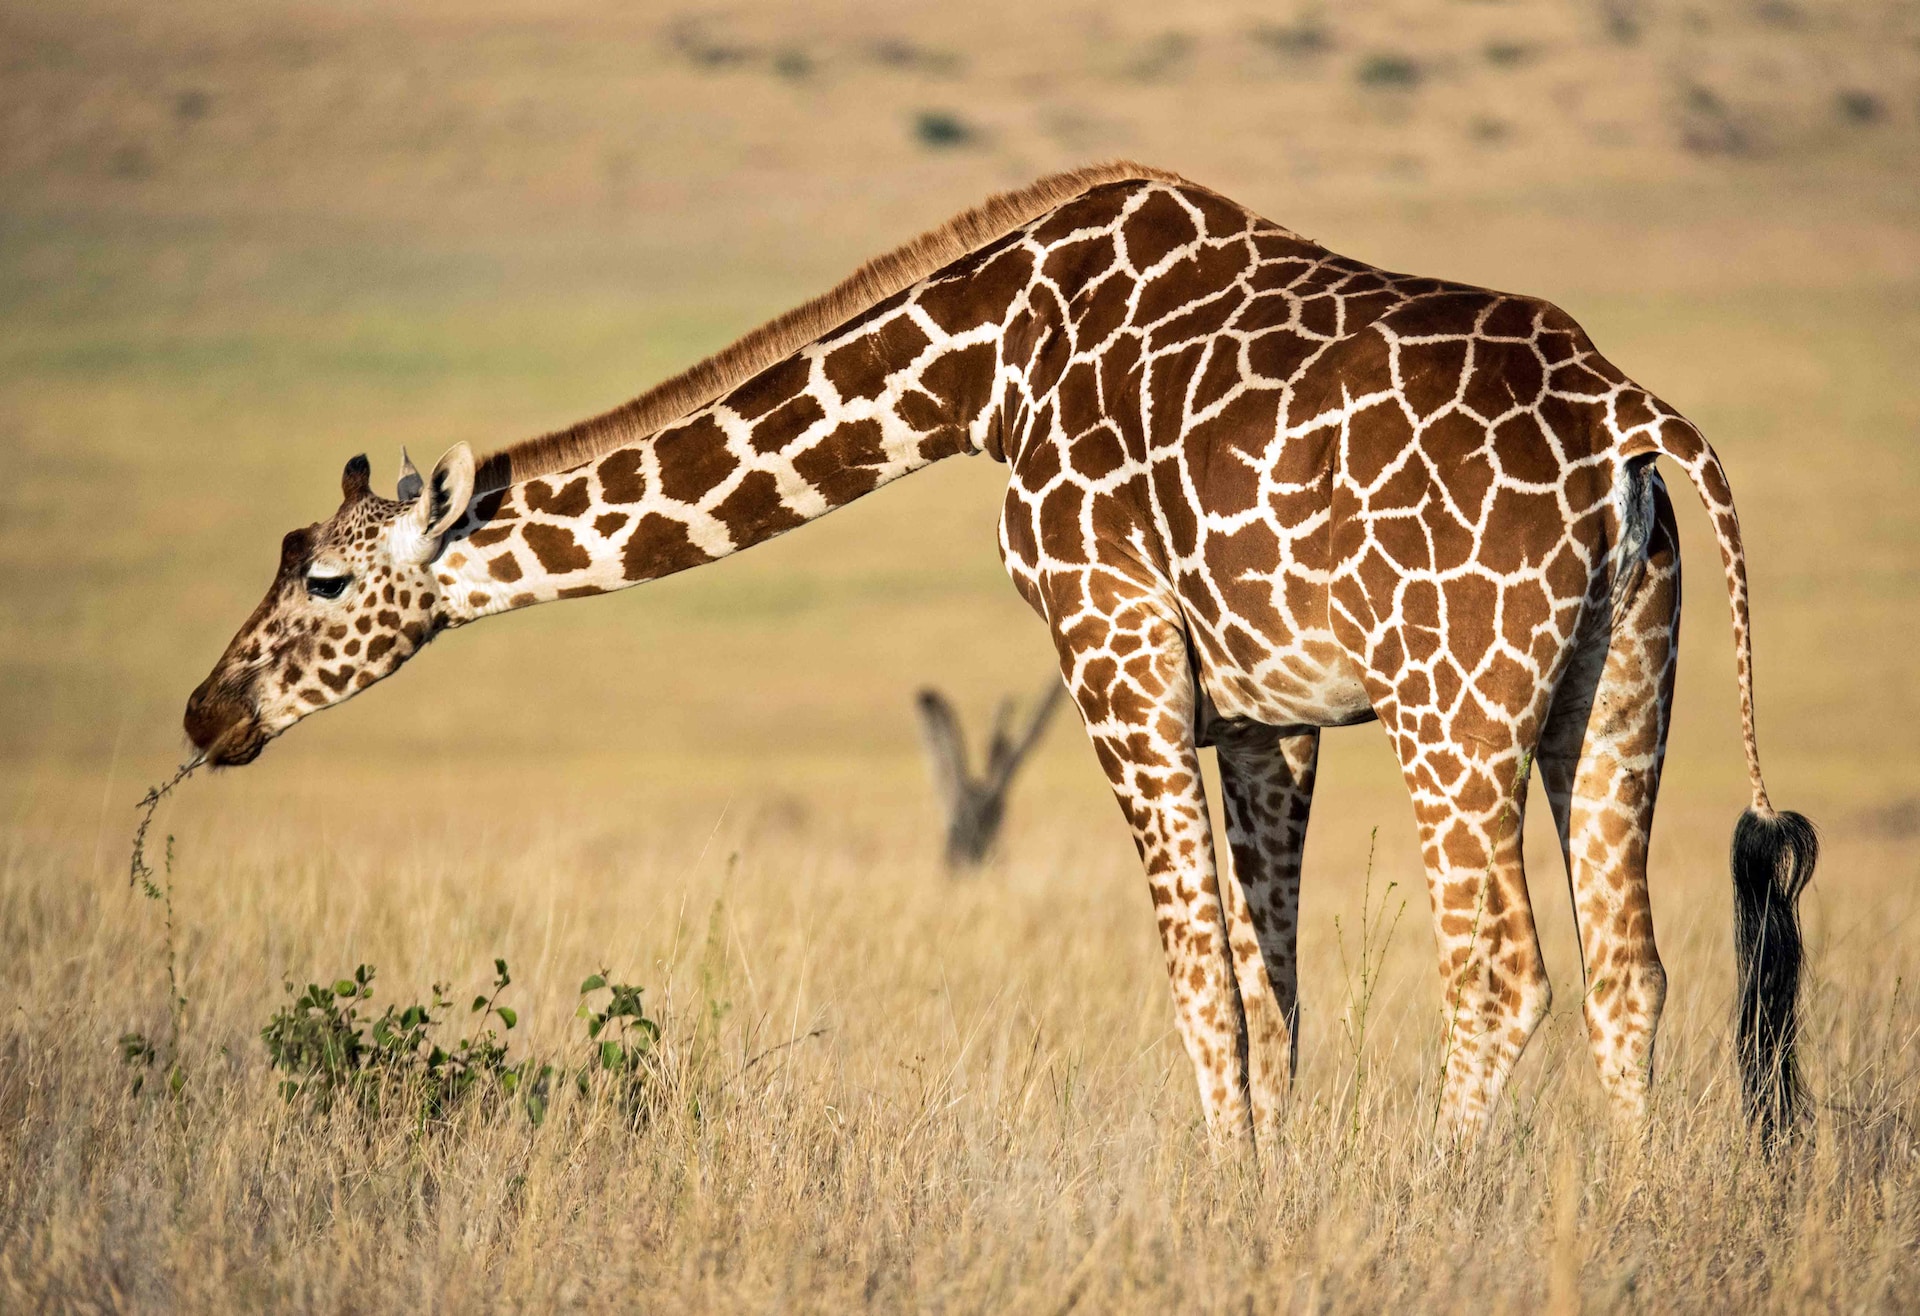 7 Fascinating Fun Facts About Giraffes You Didn’t Know